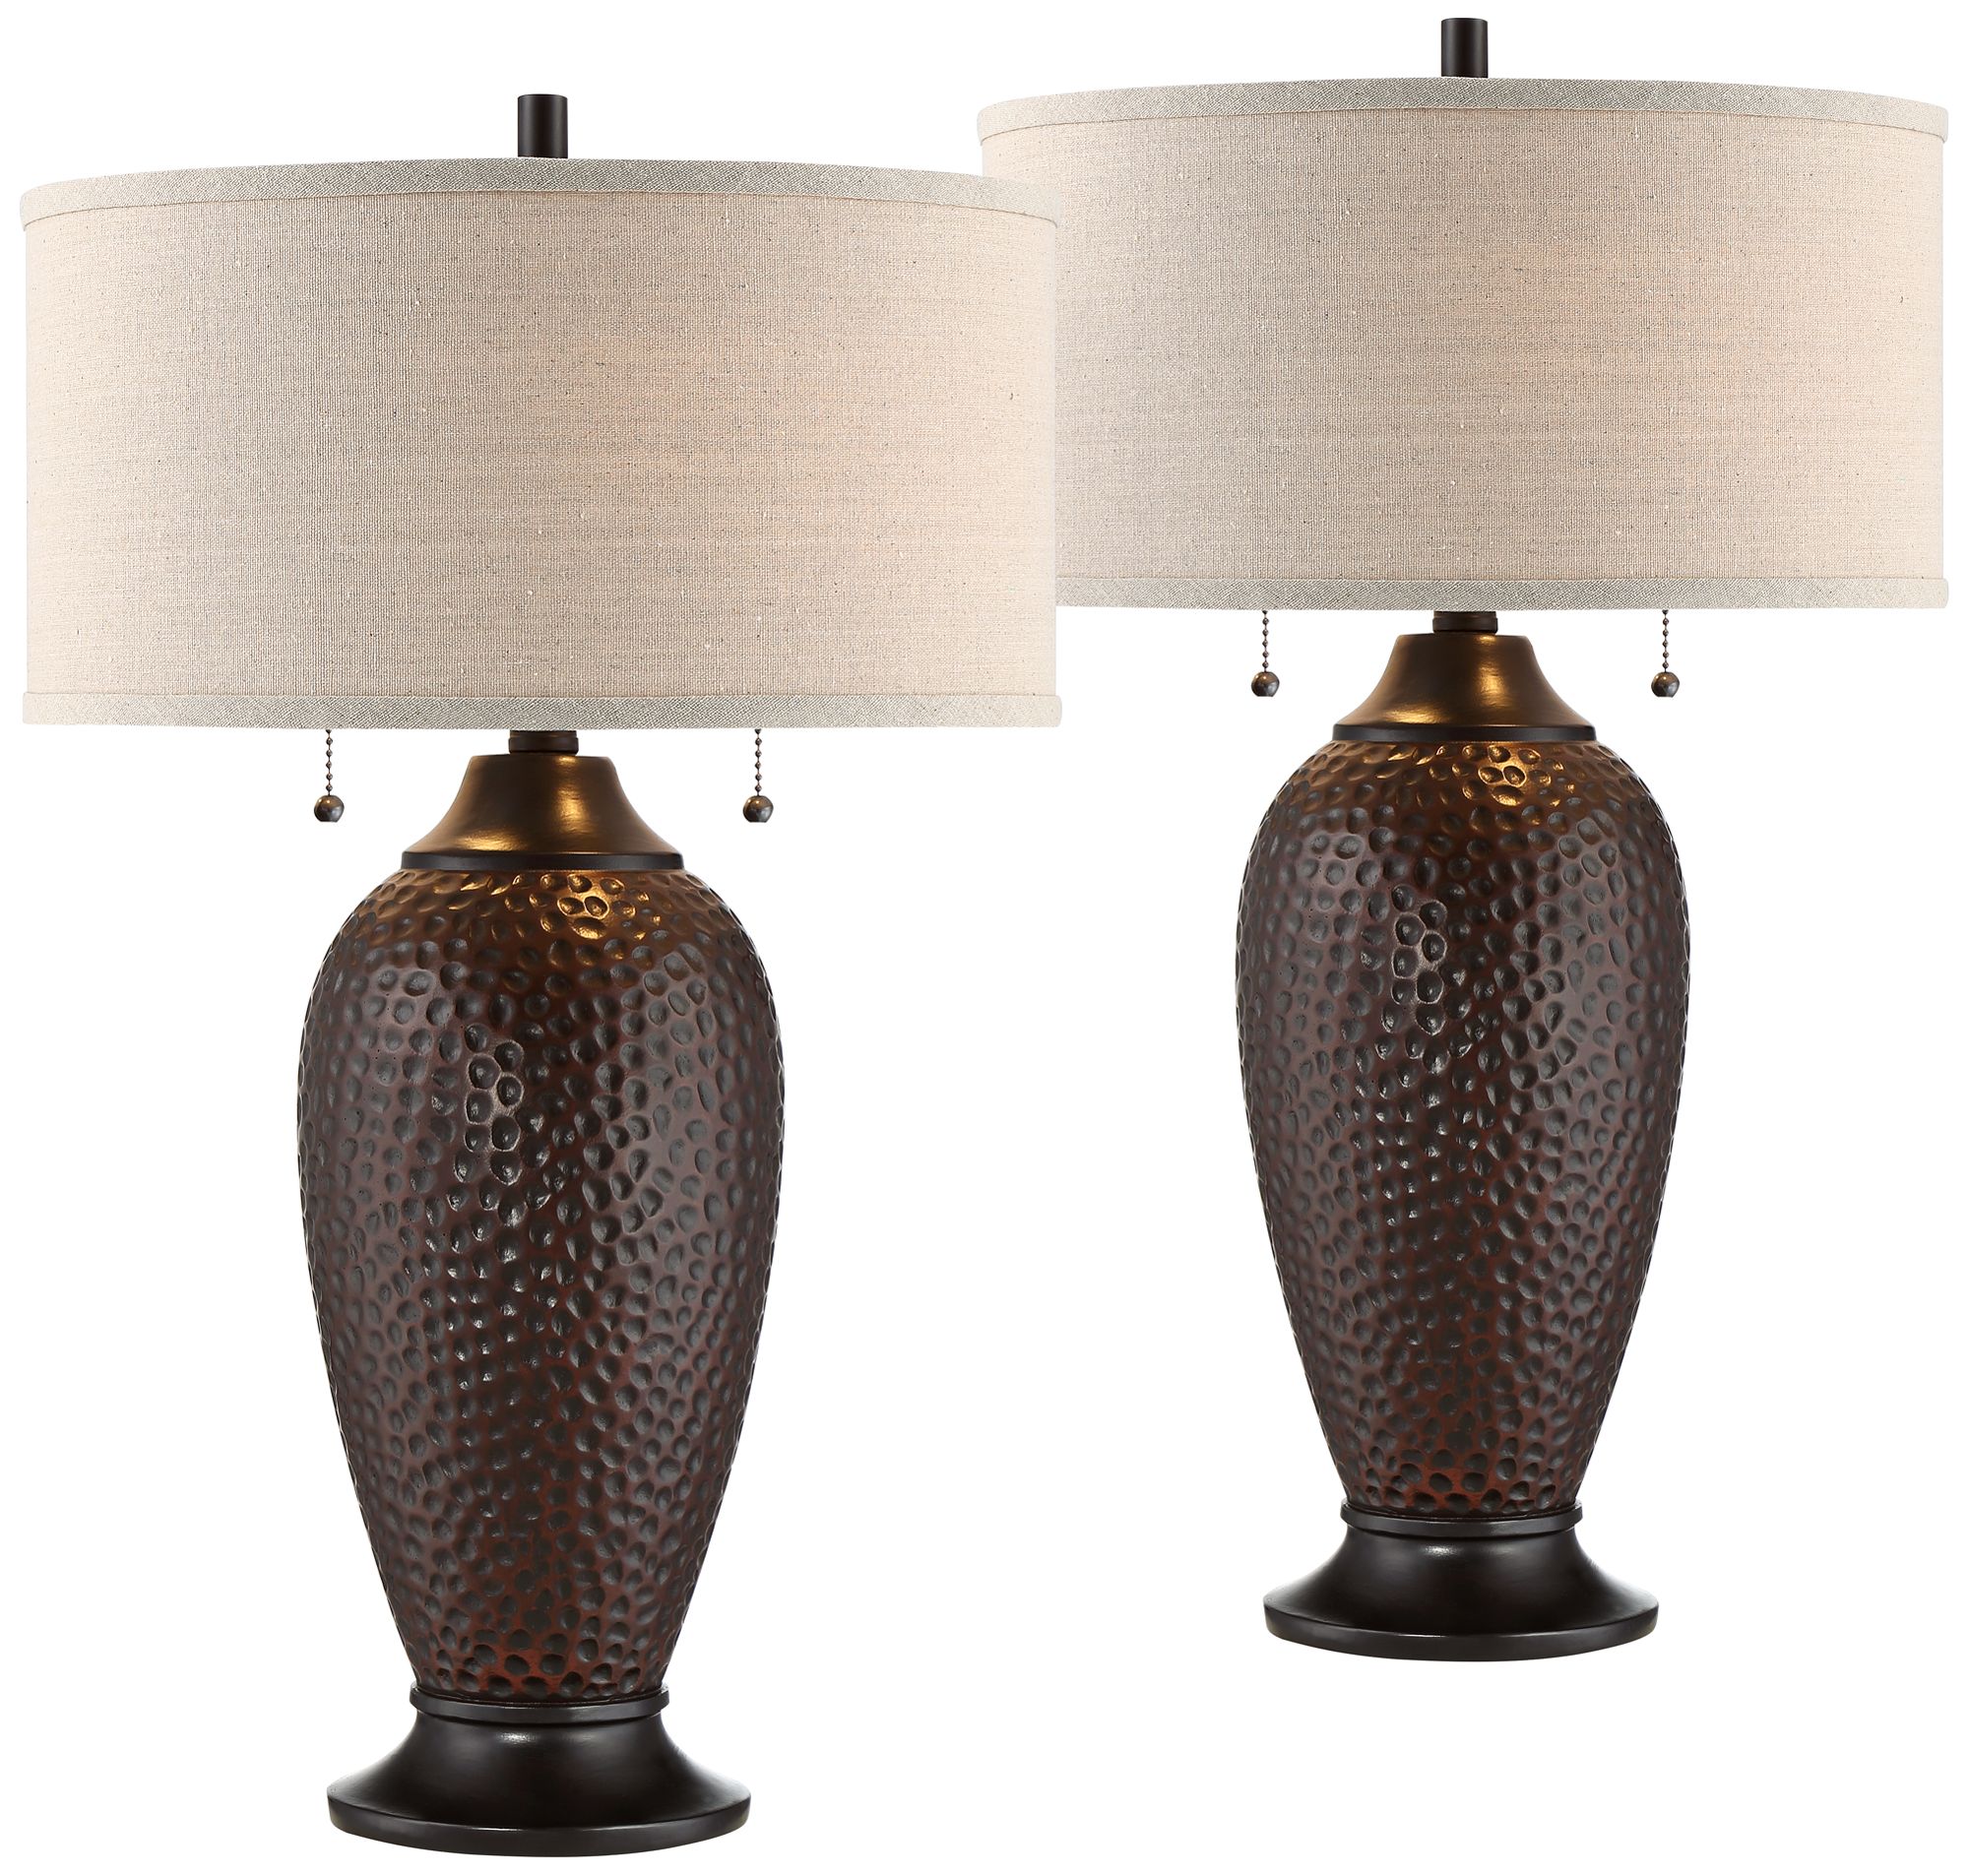 Cody Hammered Bronze Table Lamps Set of 2 with WiFi Smart Sockets